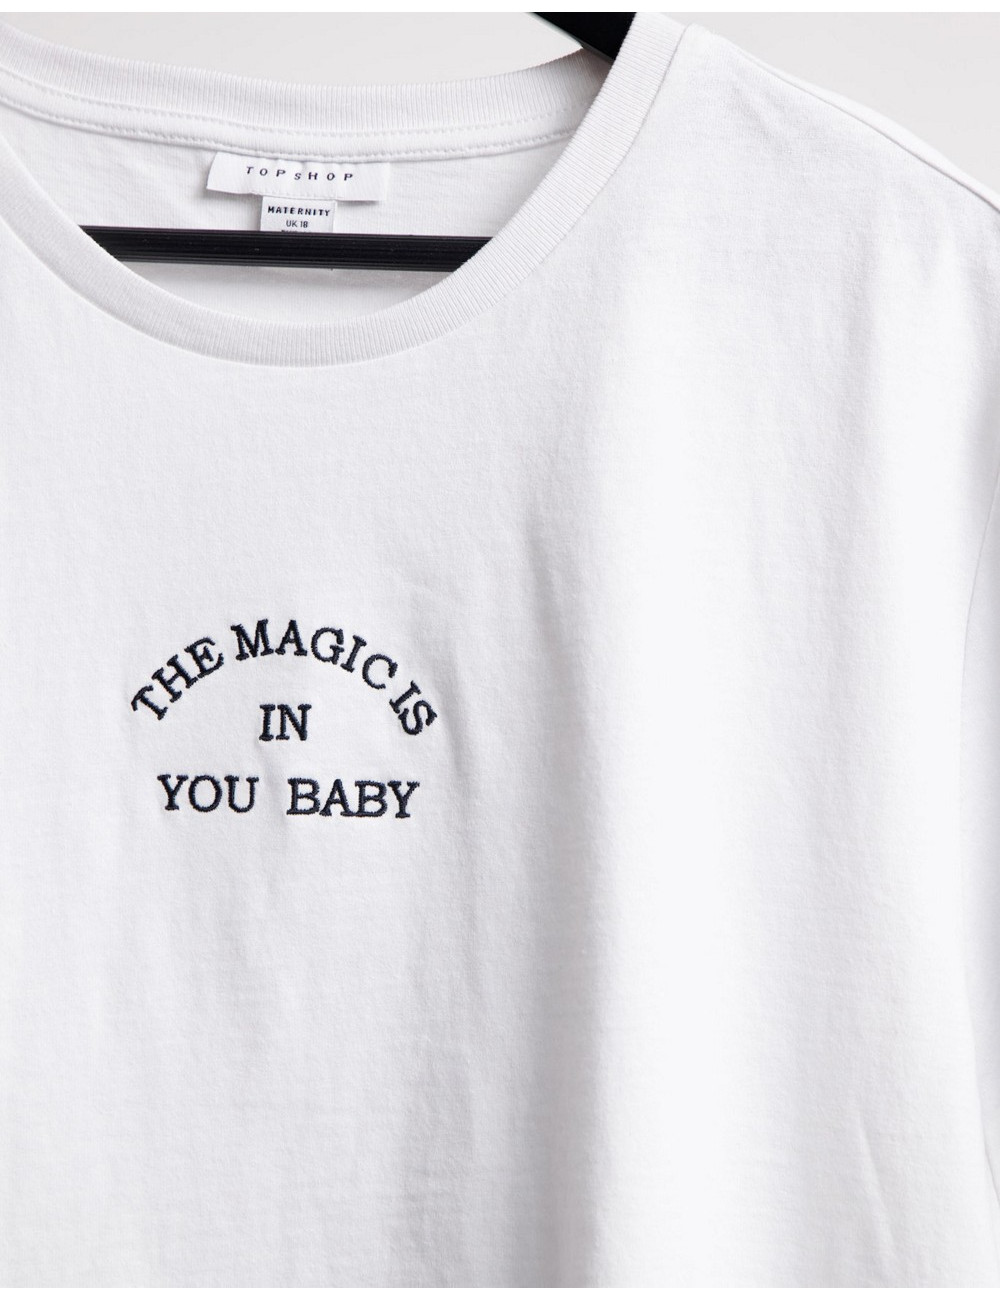 Topshop Maternity 'the...